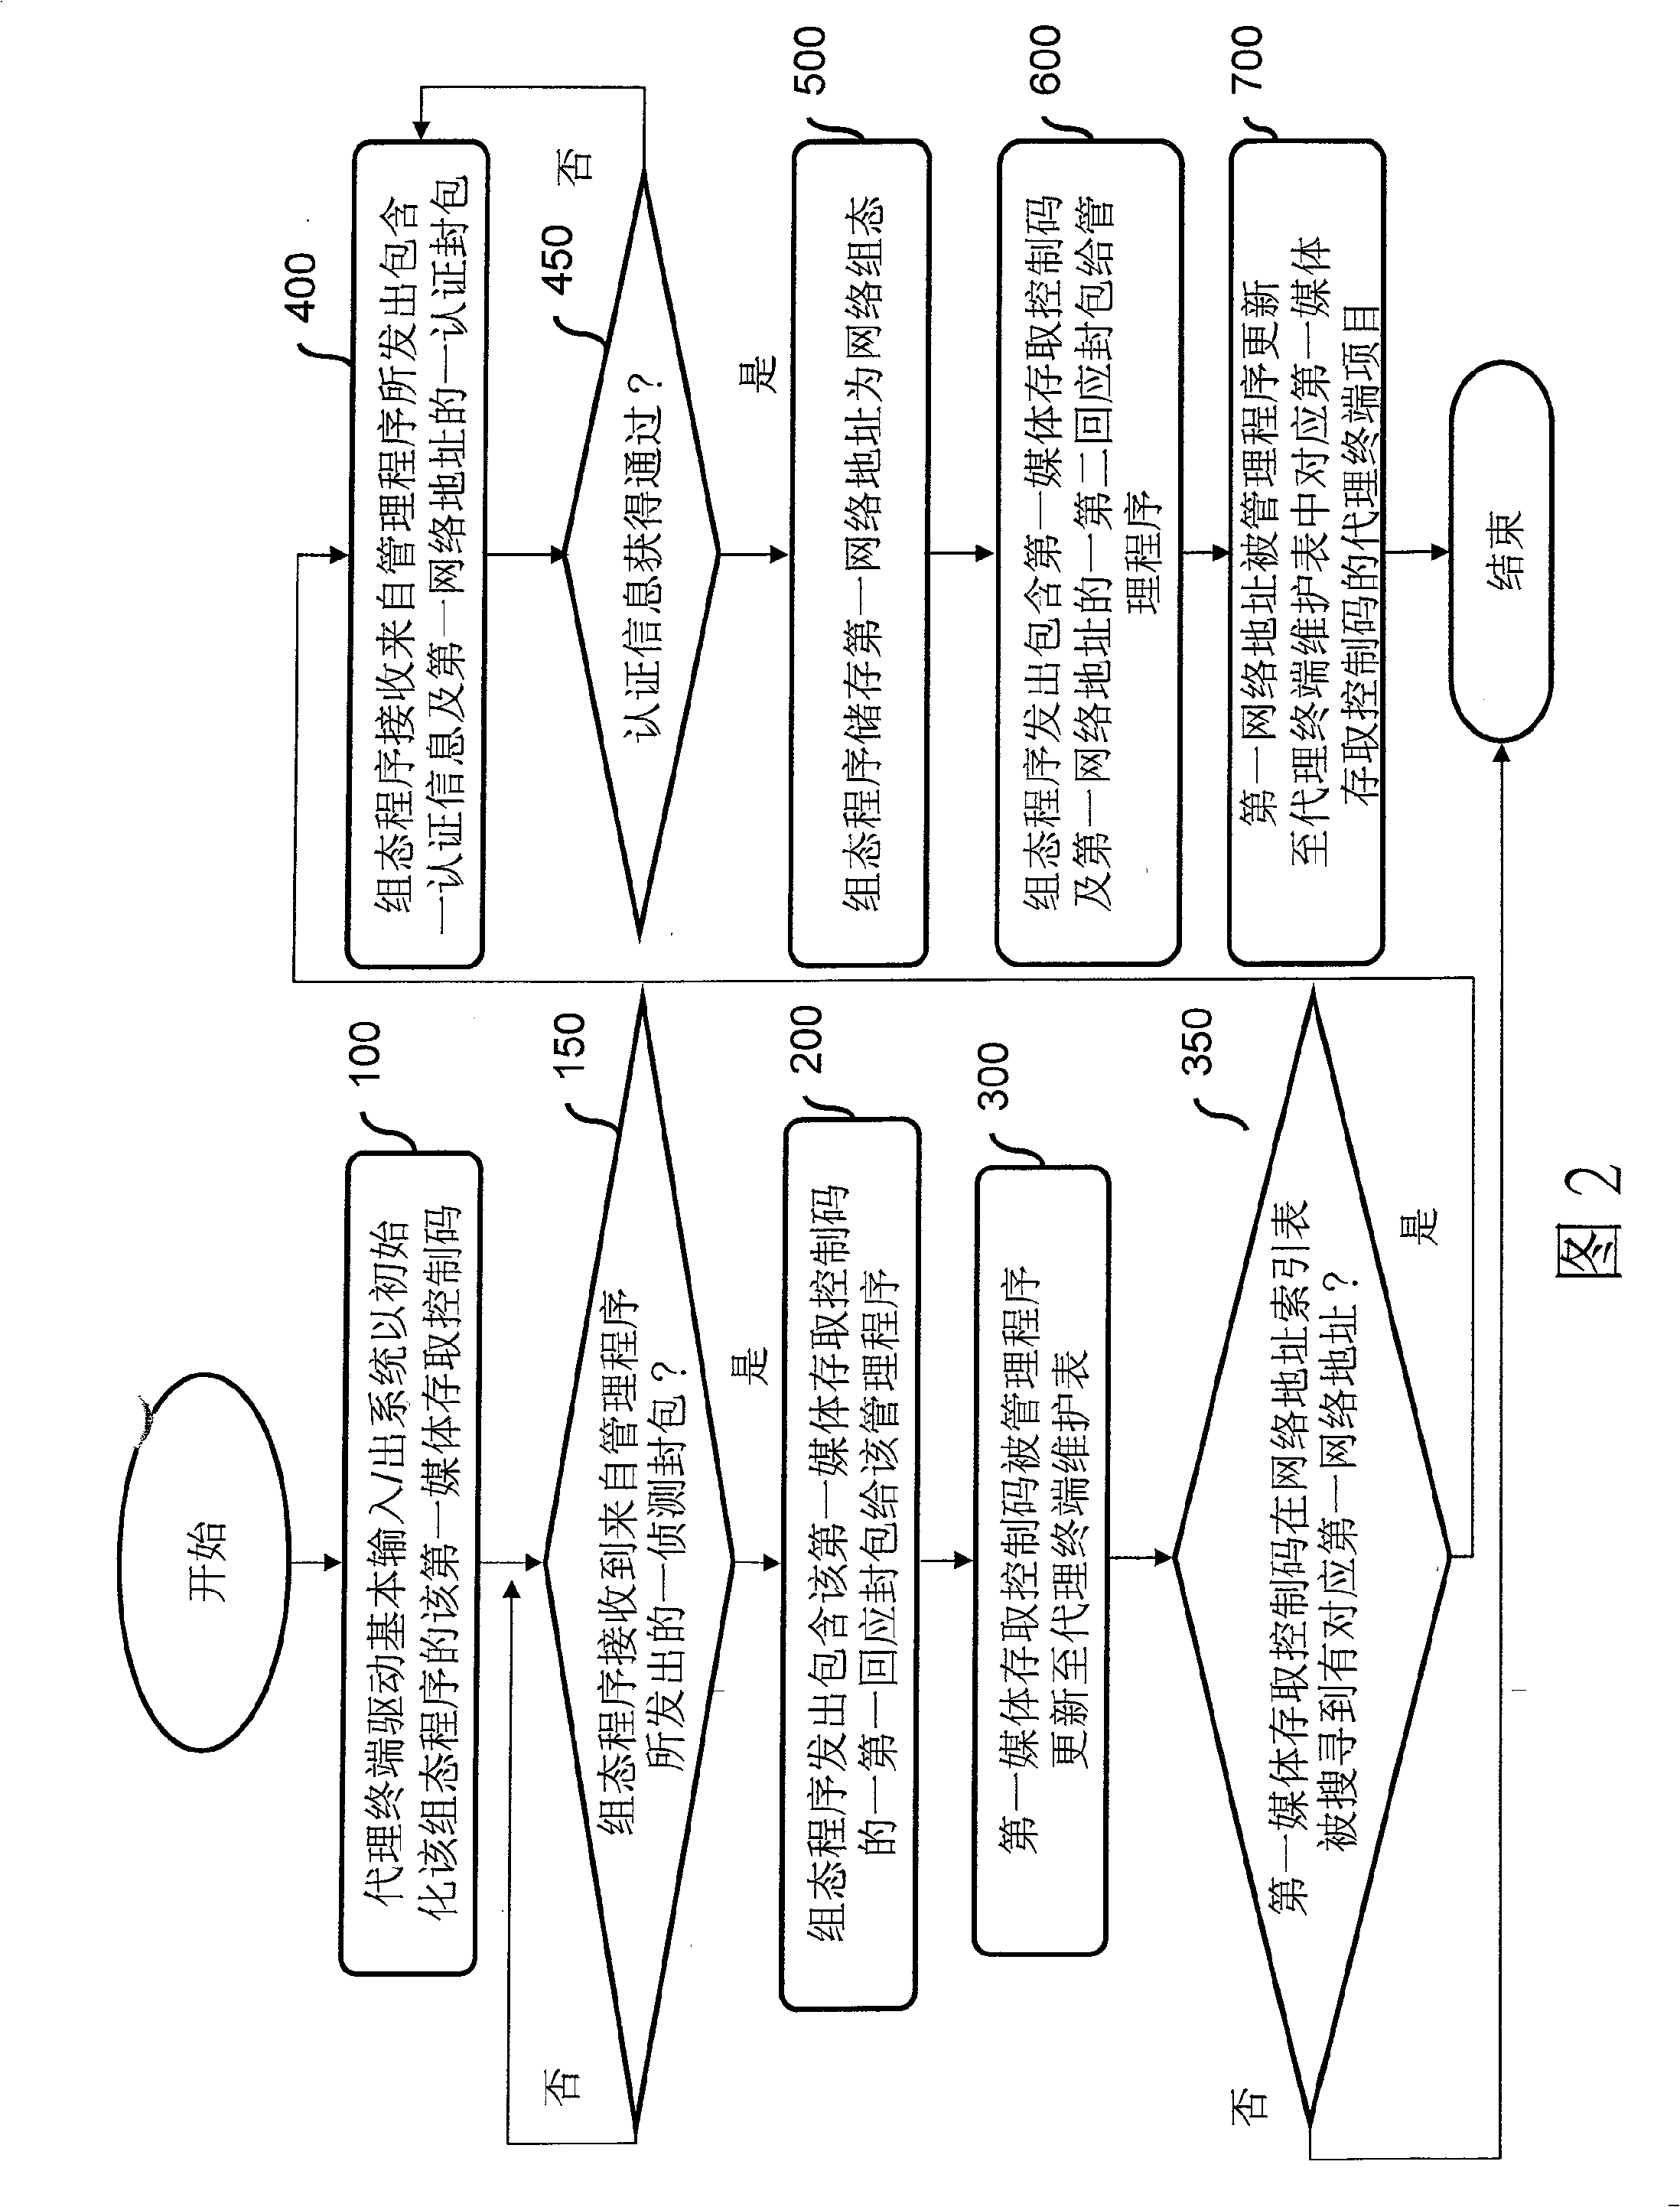 Computer executable network configuration remote dynamic setting method and its system